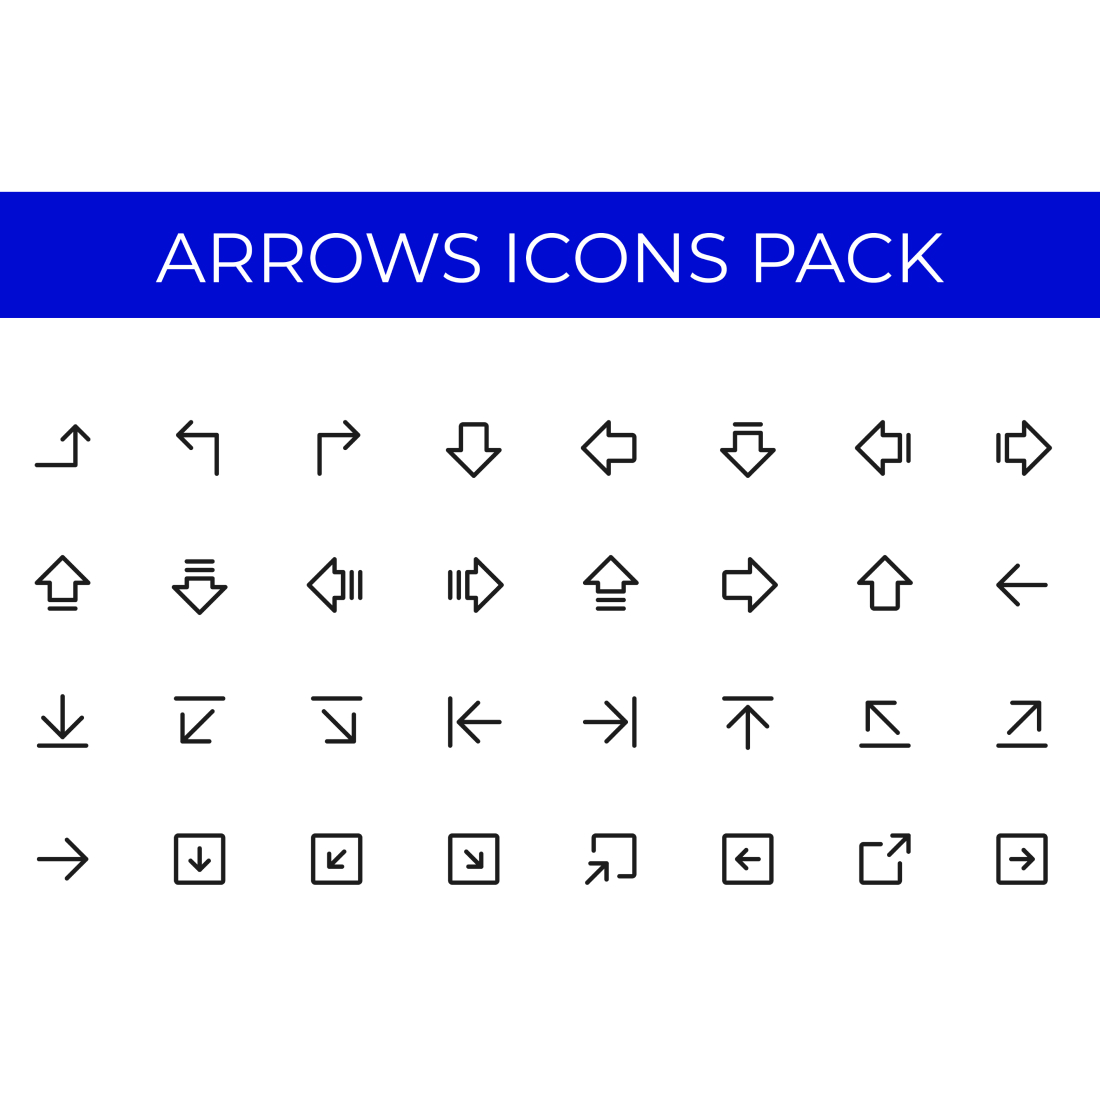 Arrow Icons pack cover image.